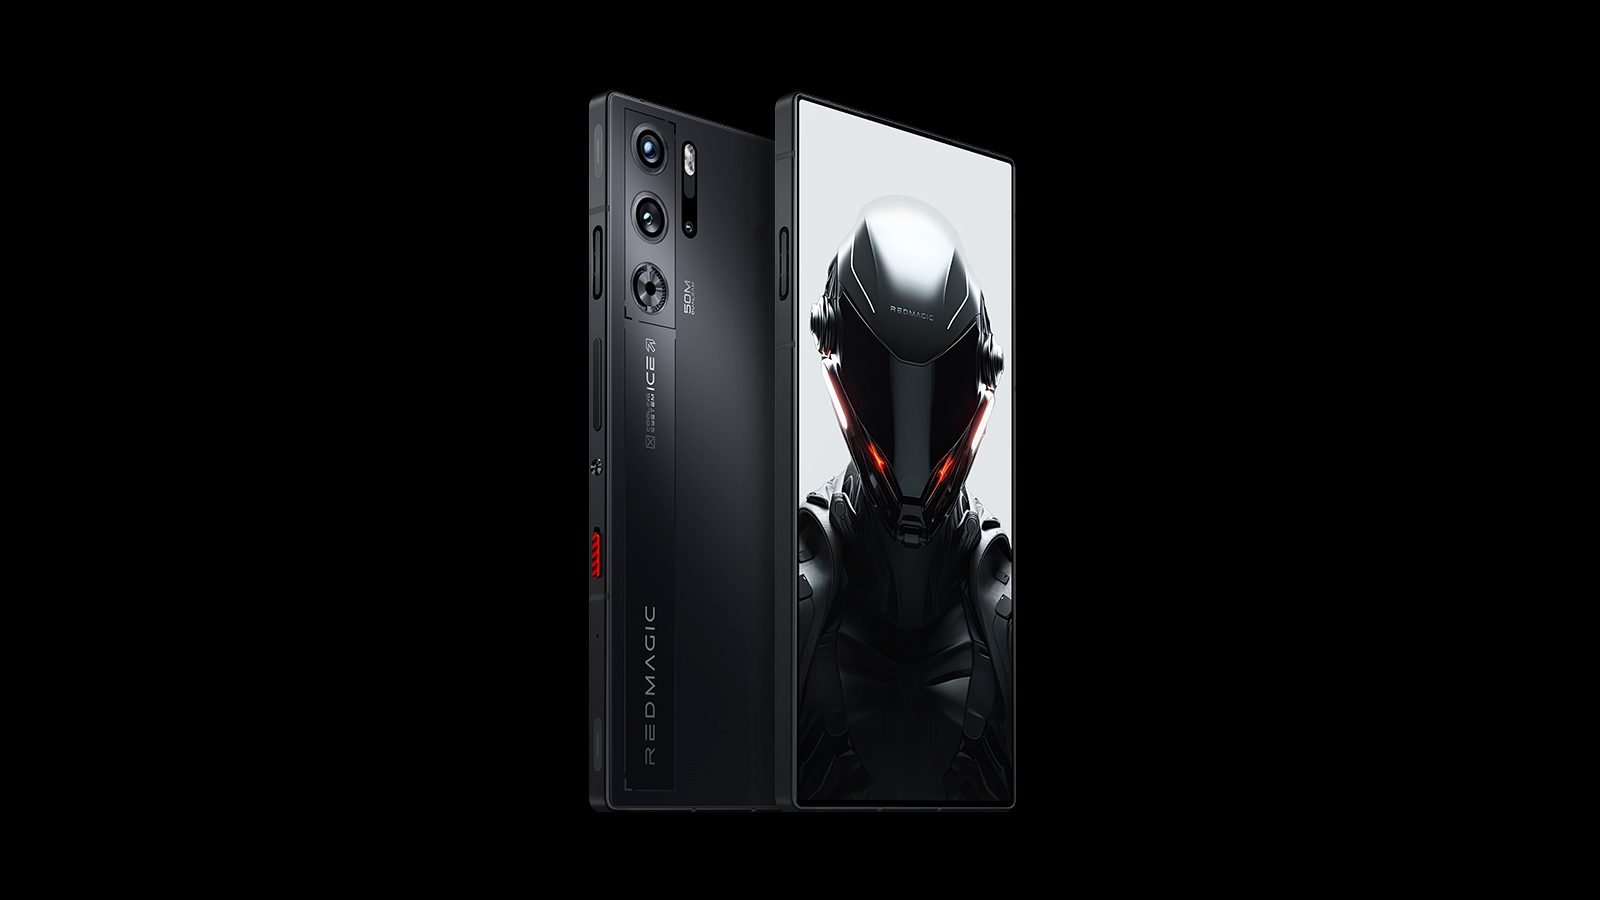 Highly-spec'd RedMagic 9 Pro series unveiled in China with U.S. version to  be introduced next month - PhoneArena